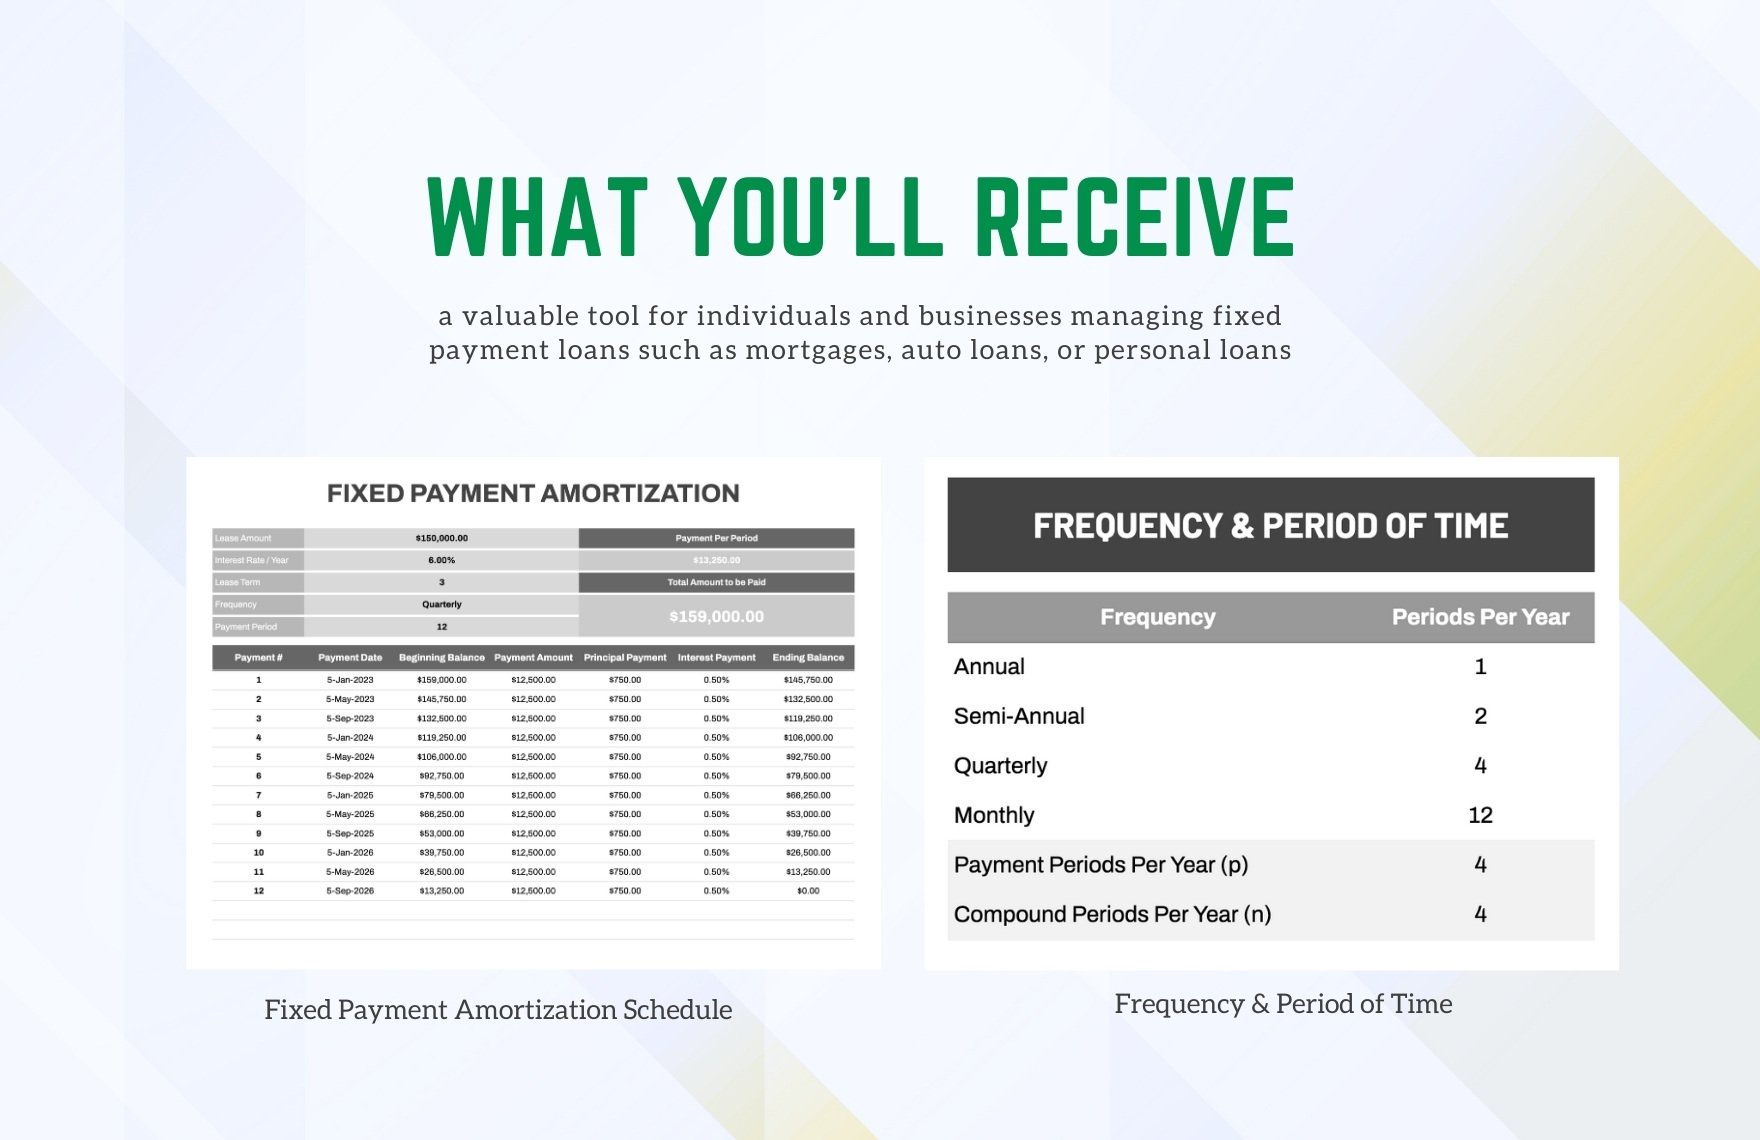 Fixed Payment Amortization Schedule Template